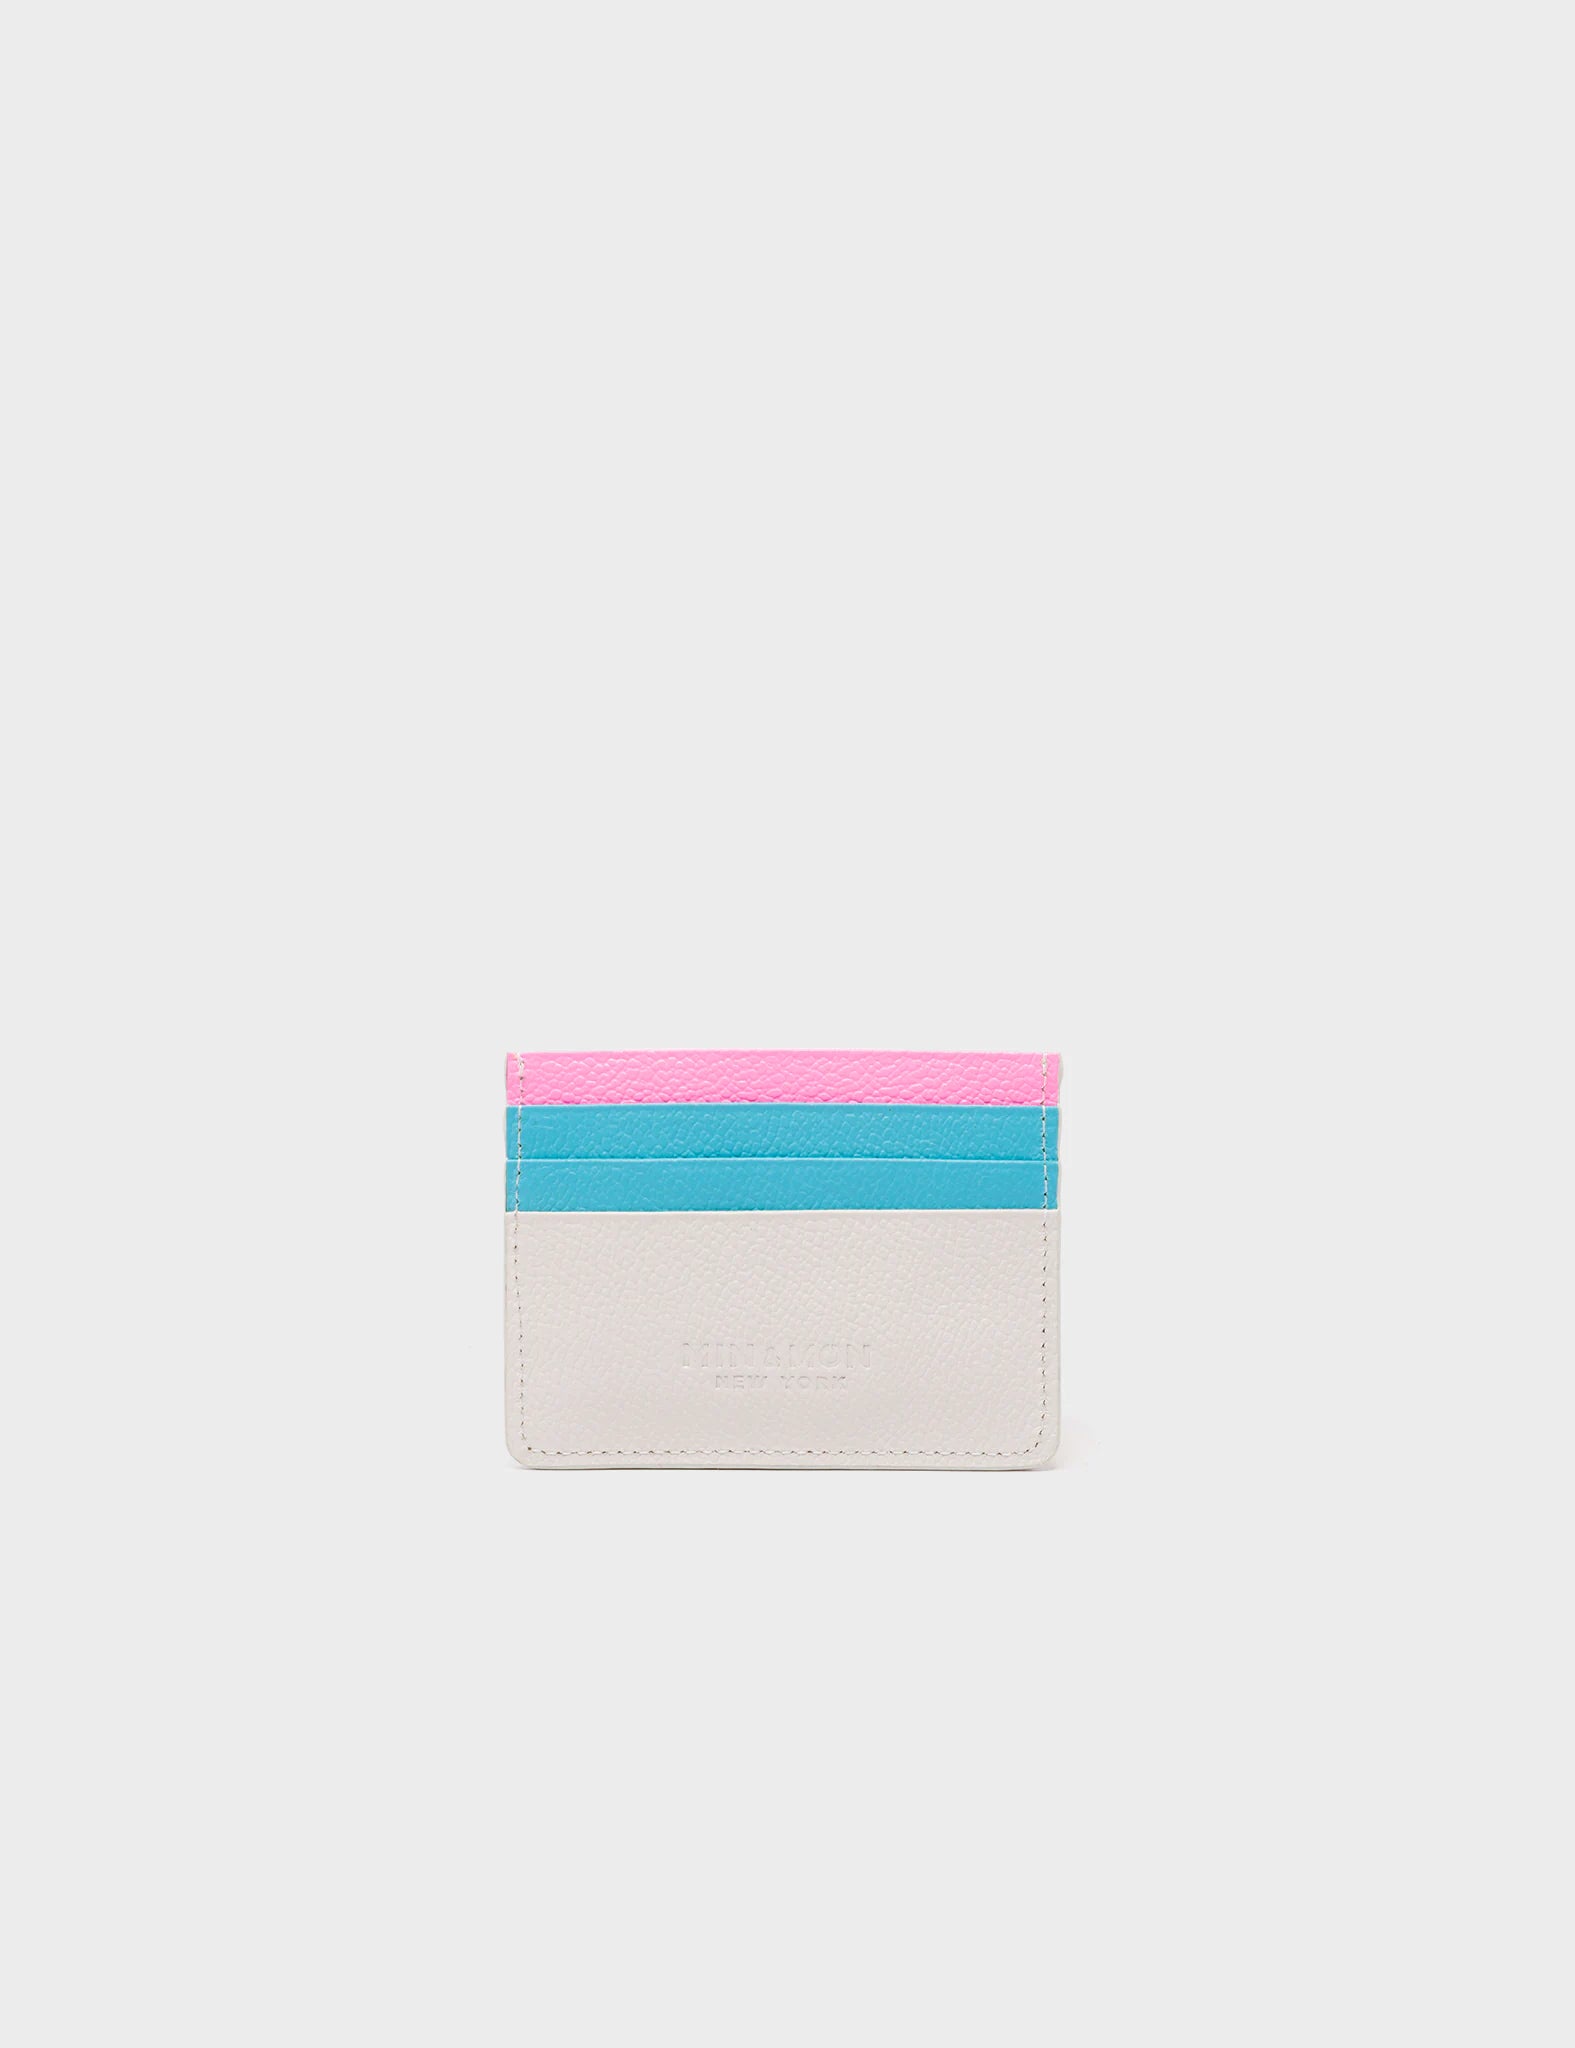 Filium Cream Leather Cardholder - Colorful Eyes Embroidery - Back View